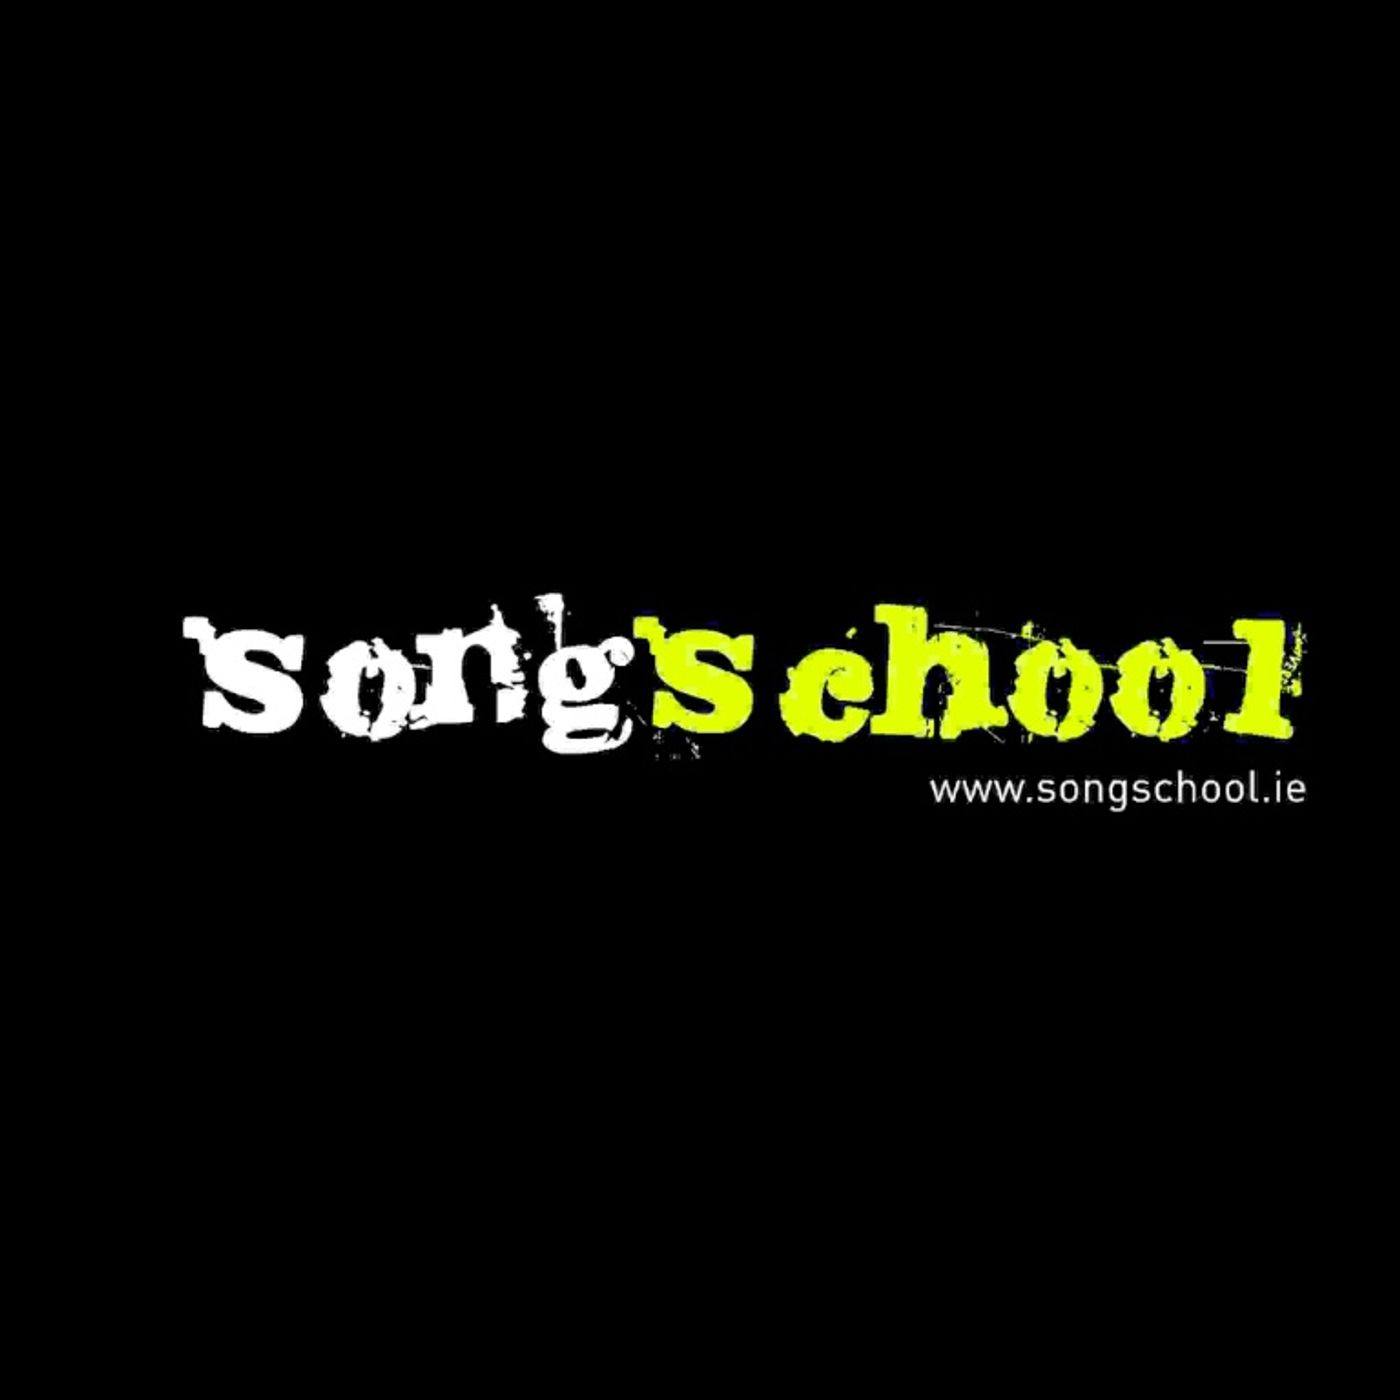 The Songschool Show @ Laytown #1